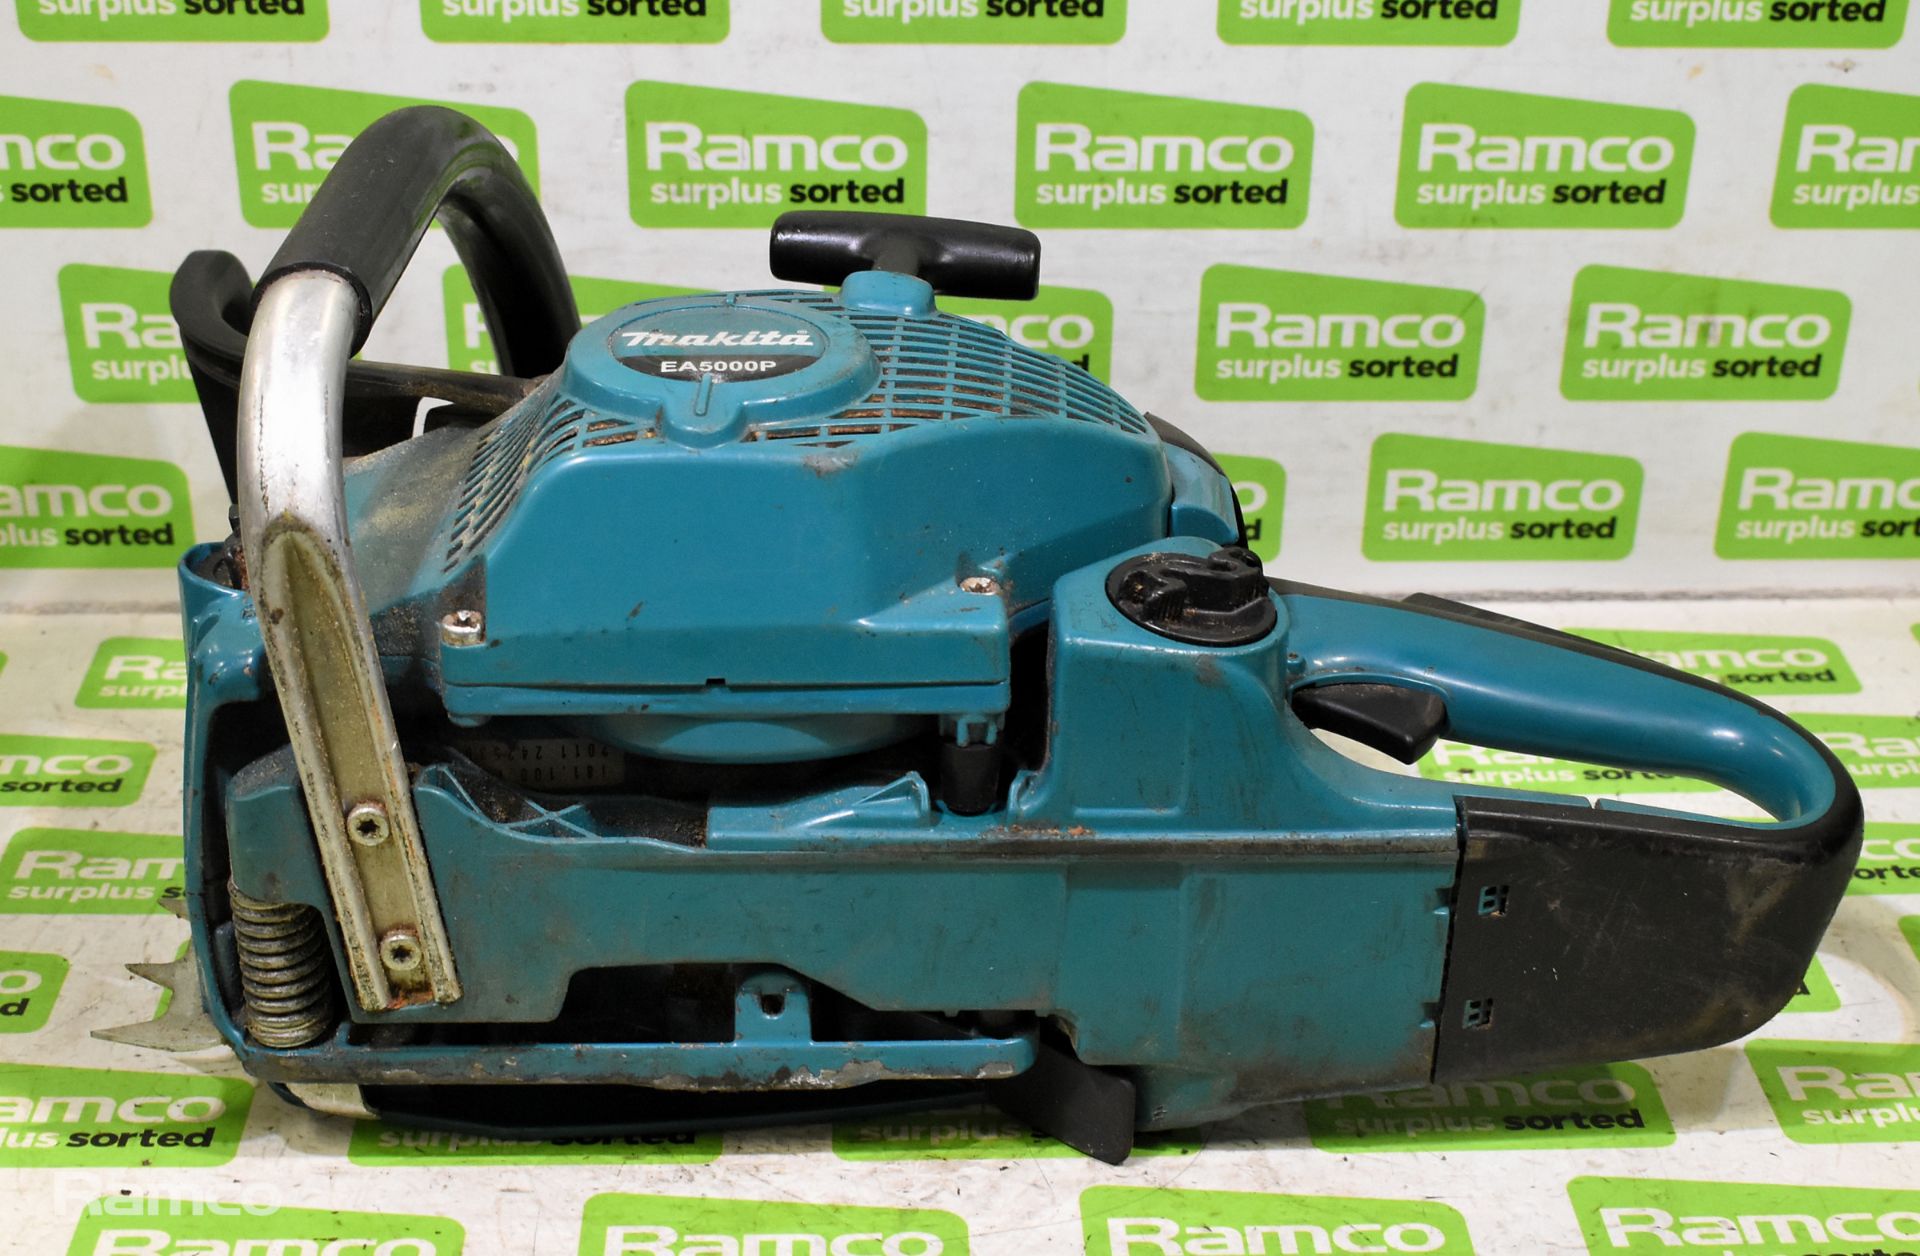 4x Makita DCS5030 50cc petrol chainsaw - BODIES ONLY - AS SPARES AND REPAIRS - Image 16 of 21